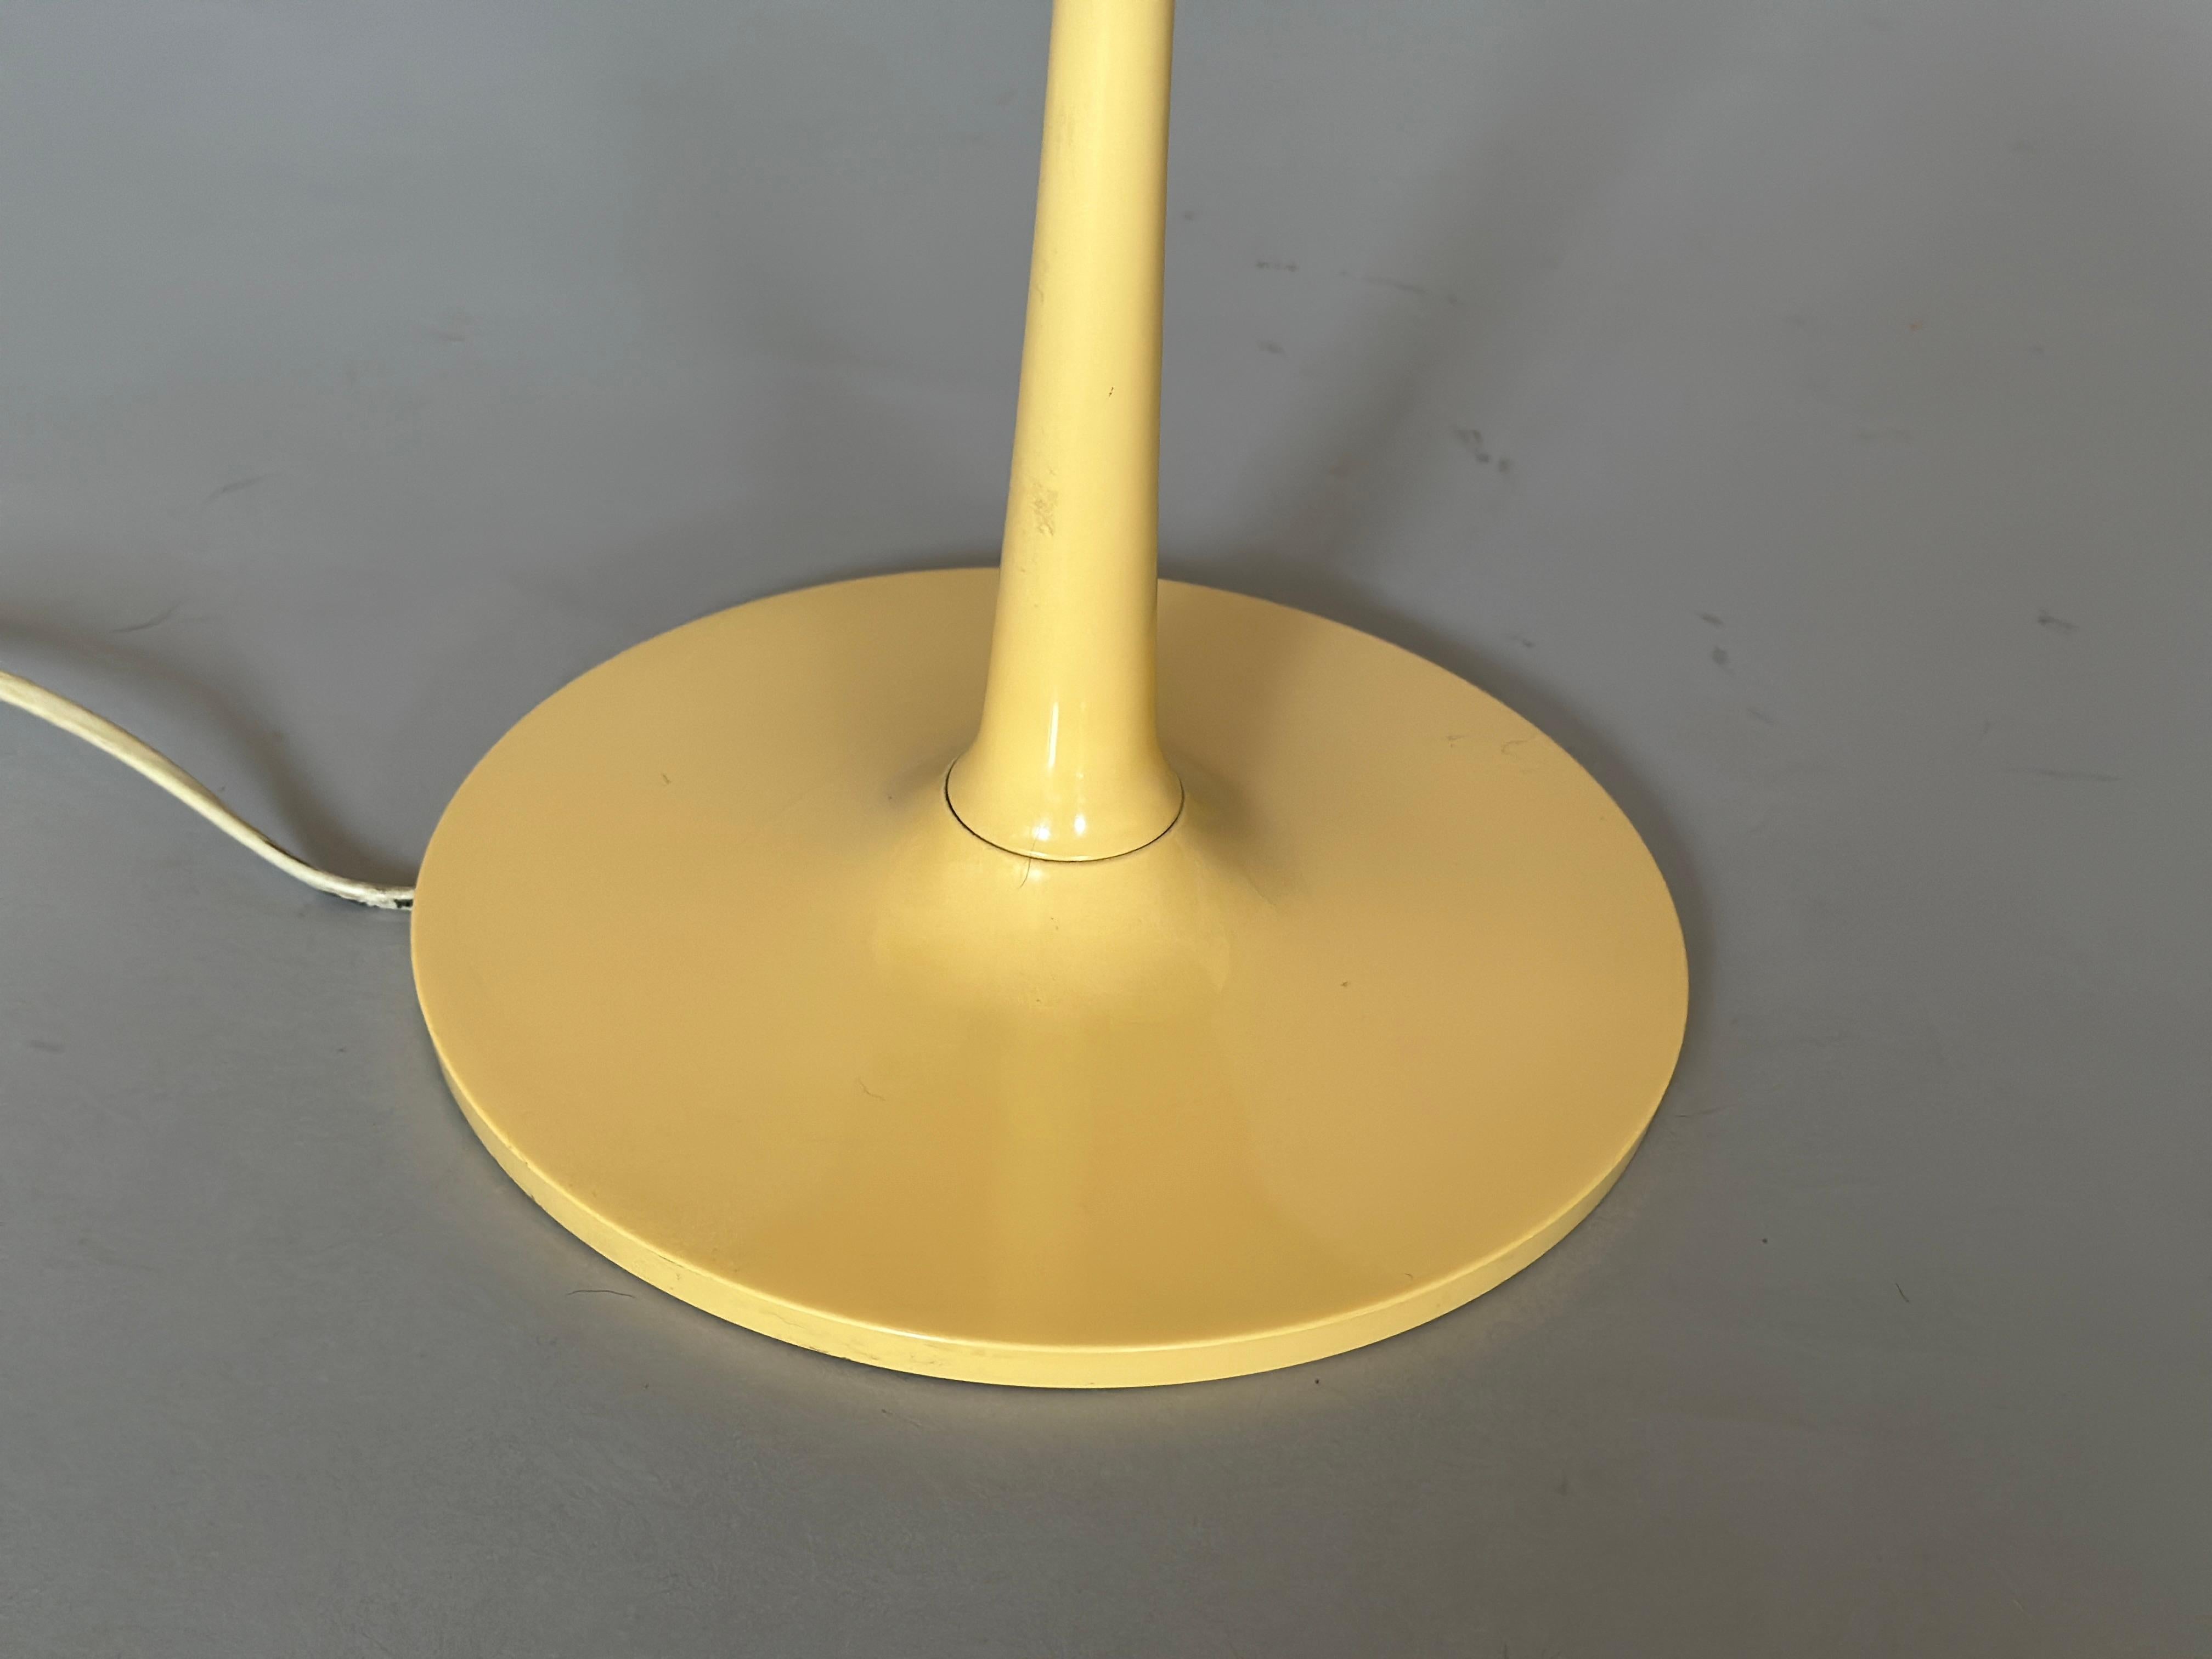 Hand-Crafted Magnus Eleback and Carl Ojerstam Rope Desk Lamp for Ikea, 1970s For Sale